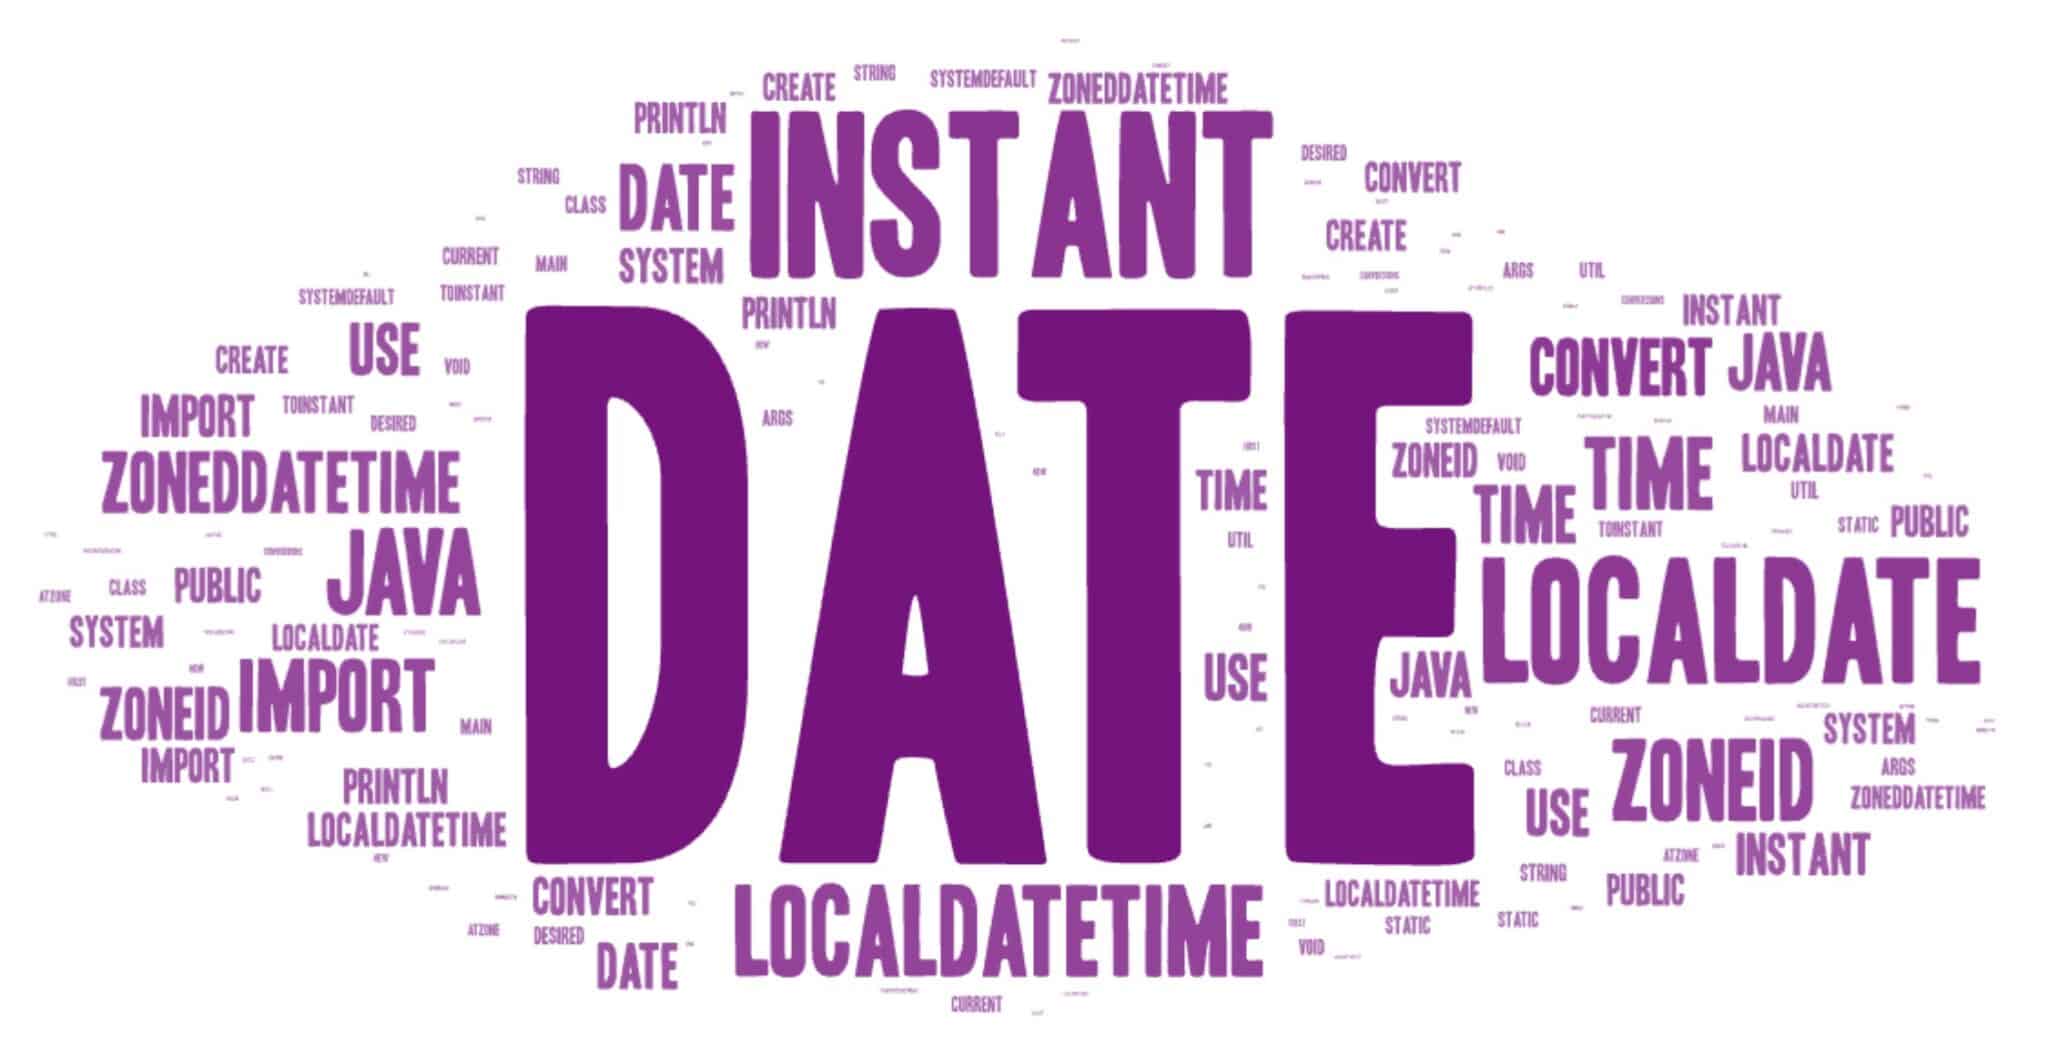 Convert Date to LocalDate or LocalDateTime and Back